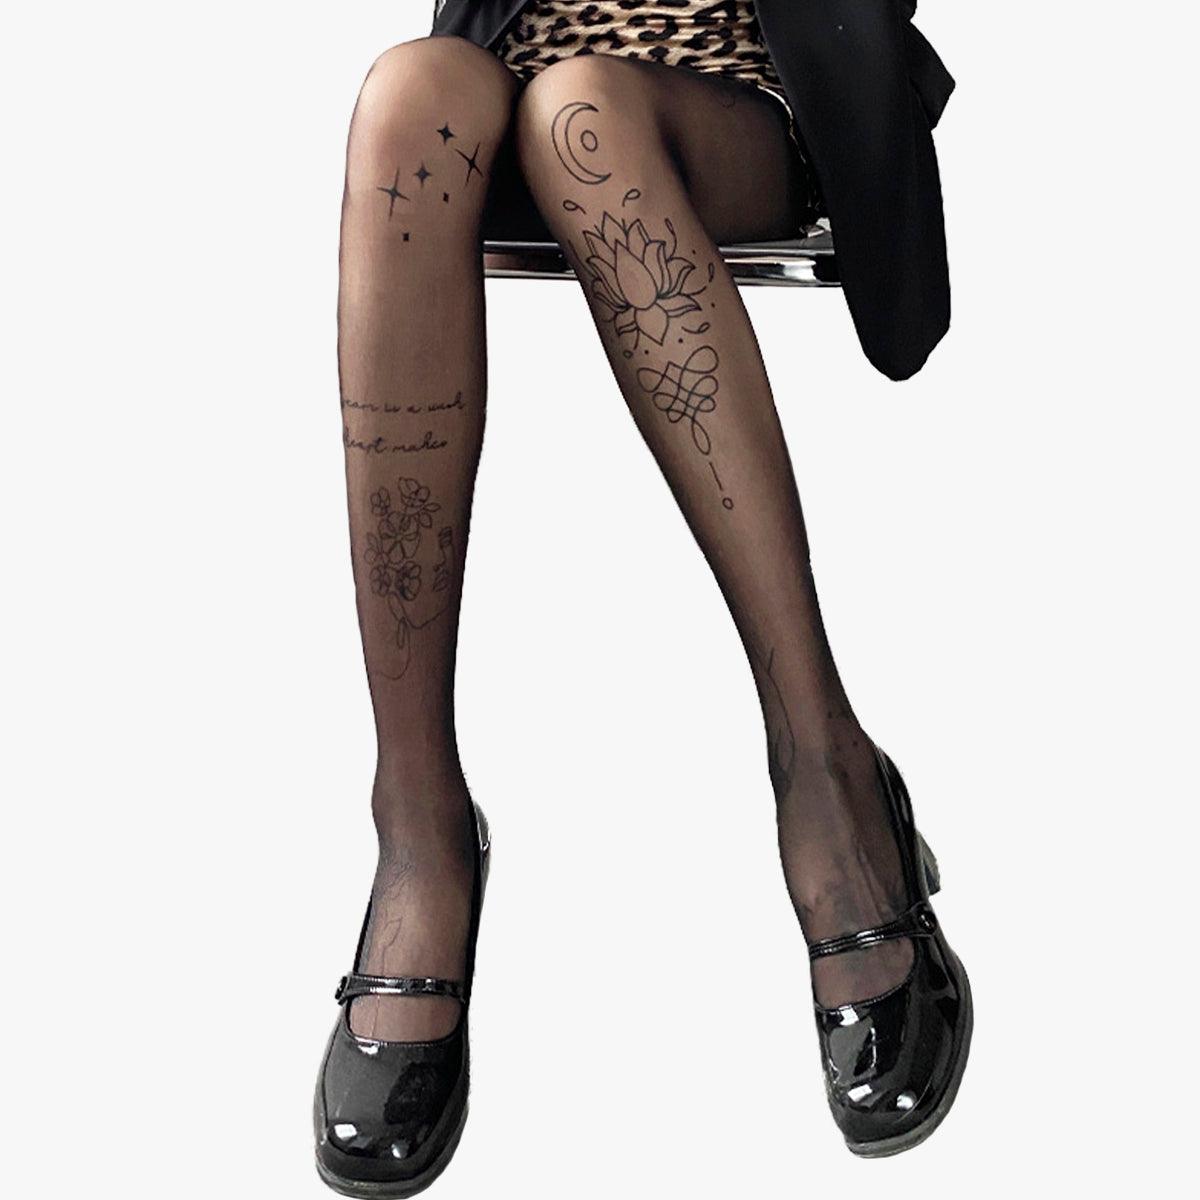 Soft Grunge Tattoo Black Translucent Tights - Aesthetic Clothes Shop